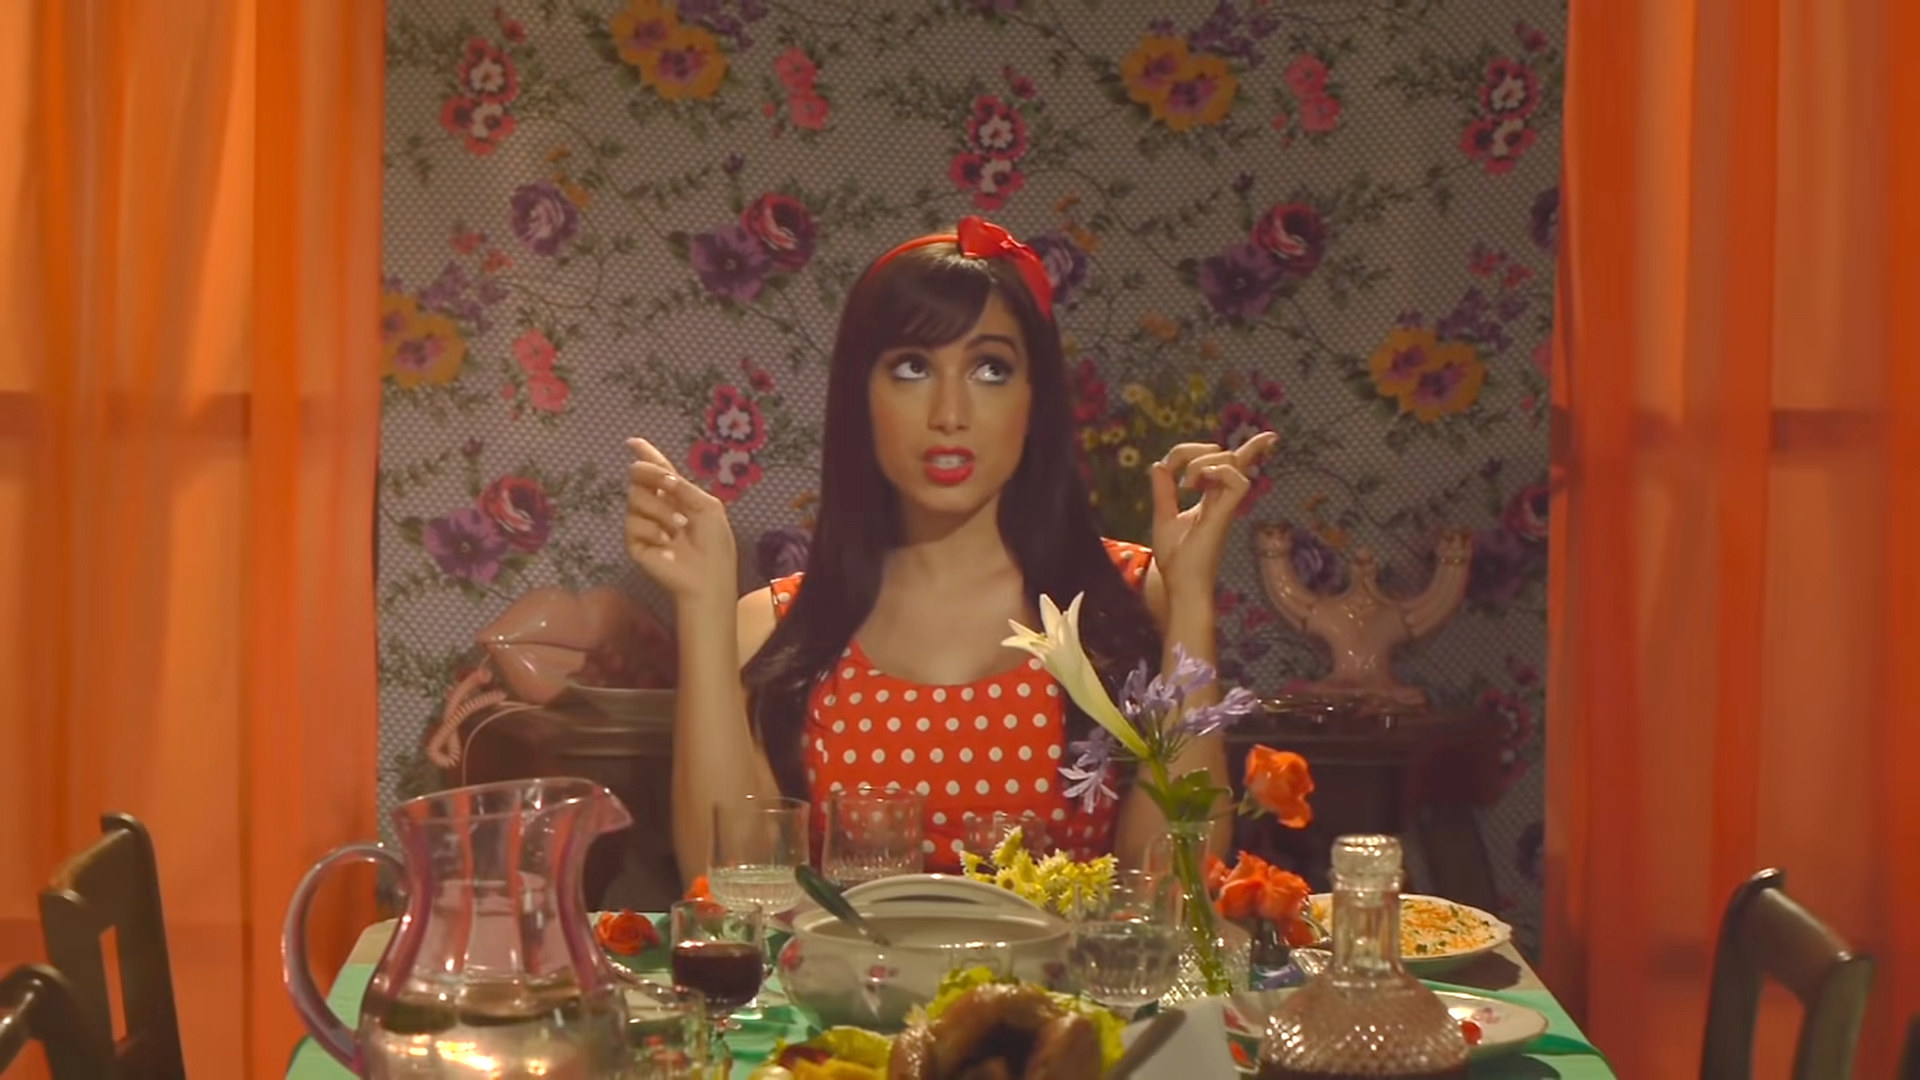 Anitta sitting at a table with lots of food and drink on it and looking up as she points upward